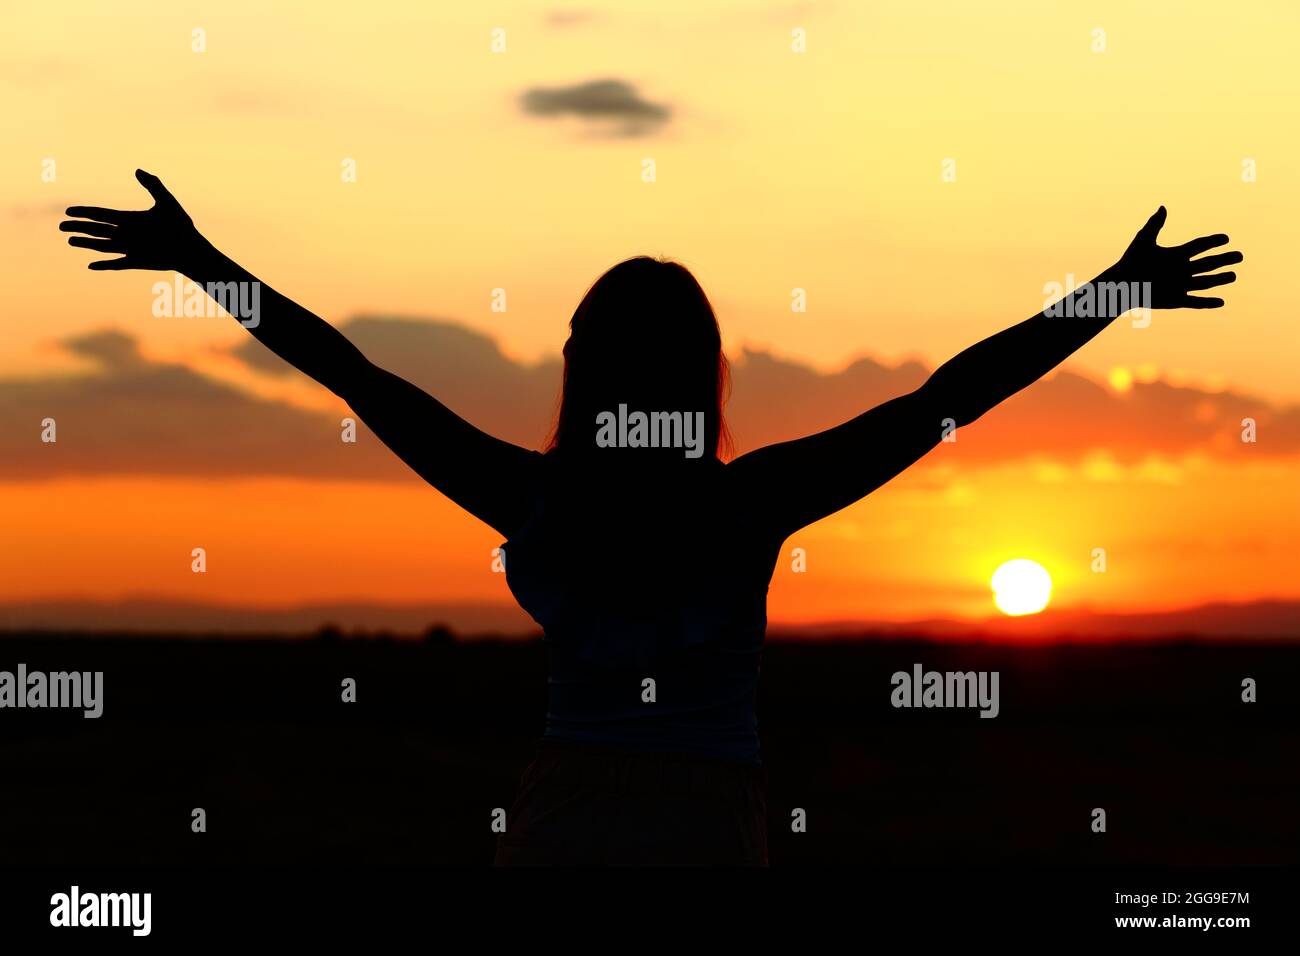 Back view portrait of a woman silhouette celebrating stretching arms at sunset Stock Photo